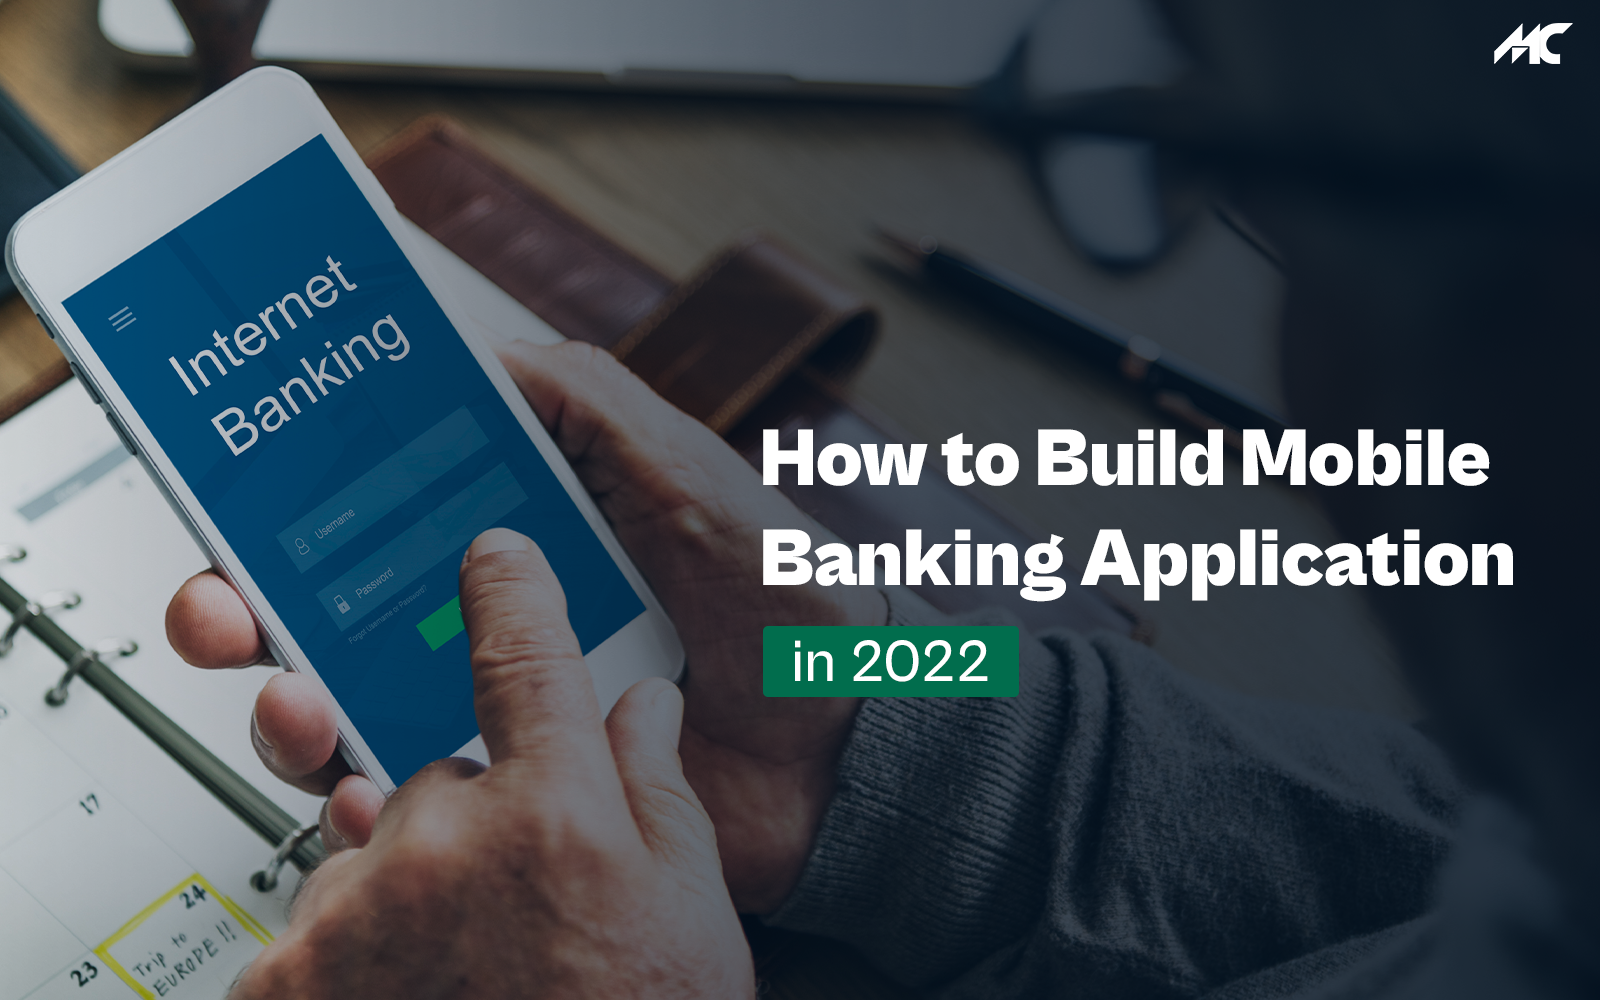 How to Build Mobile Banking Application in 2022